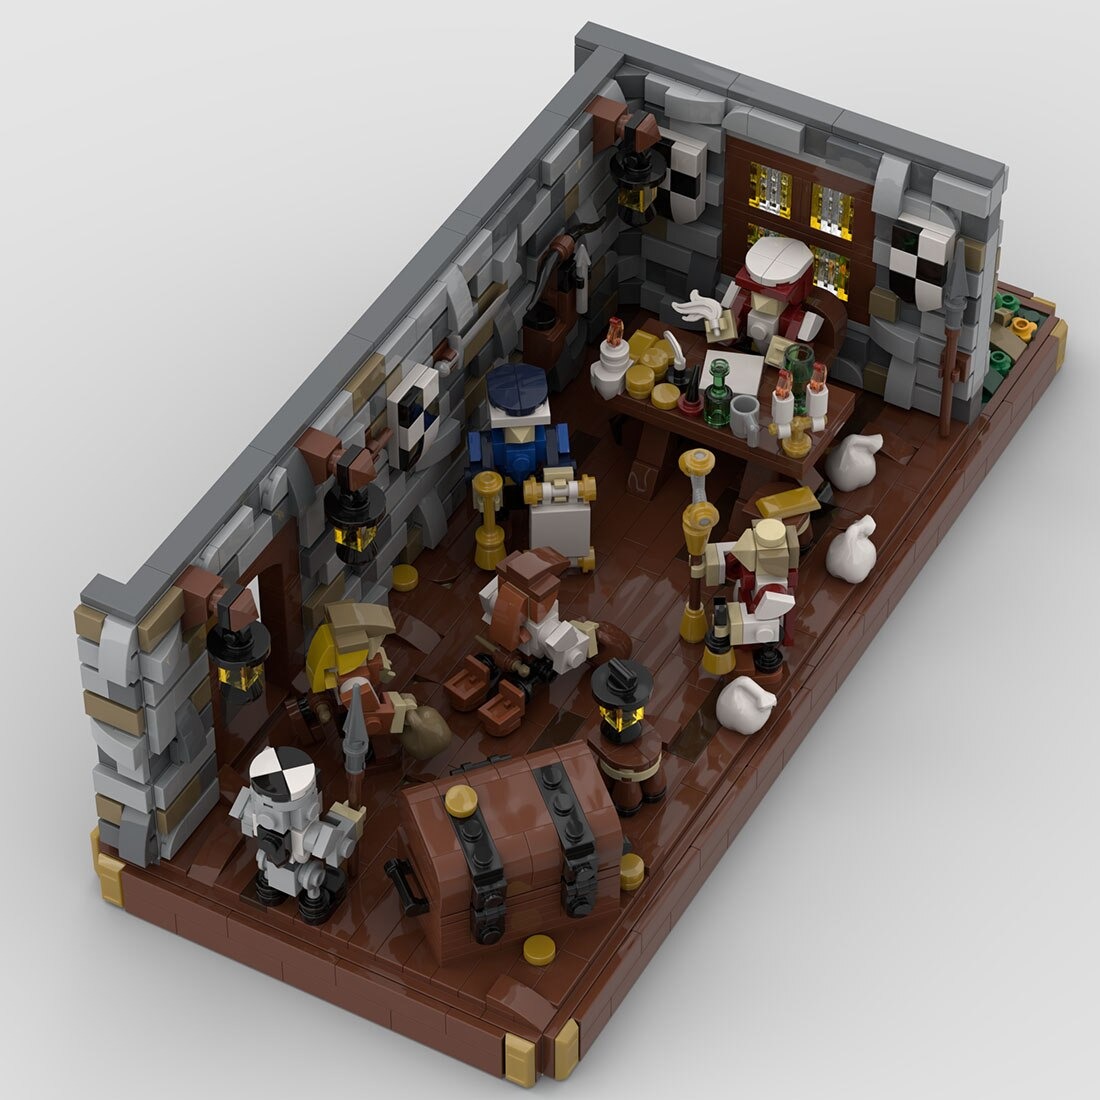 MOCBRICKLAND MOC-108371 Medieval Taxes Paid To The Count And The Church